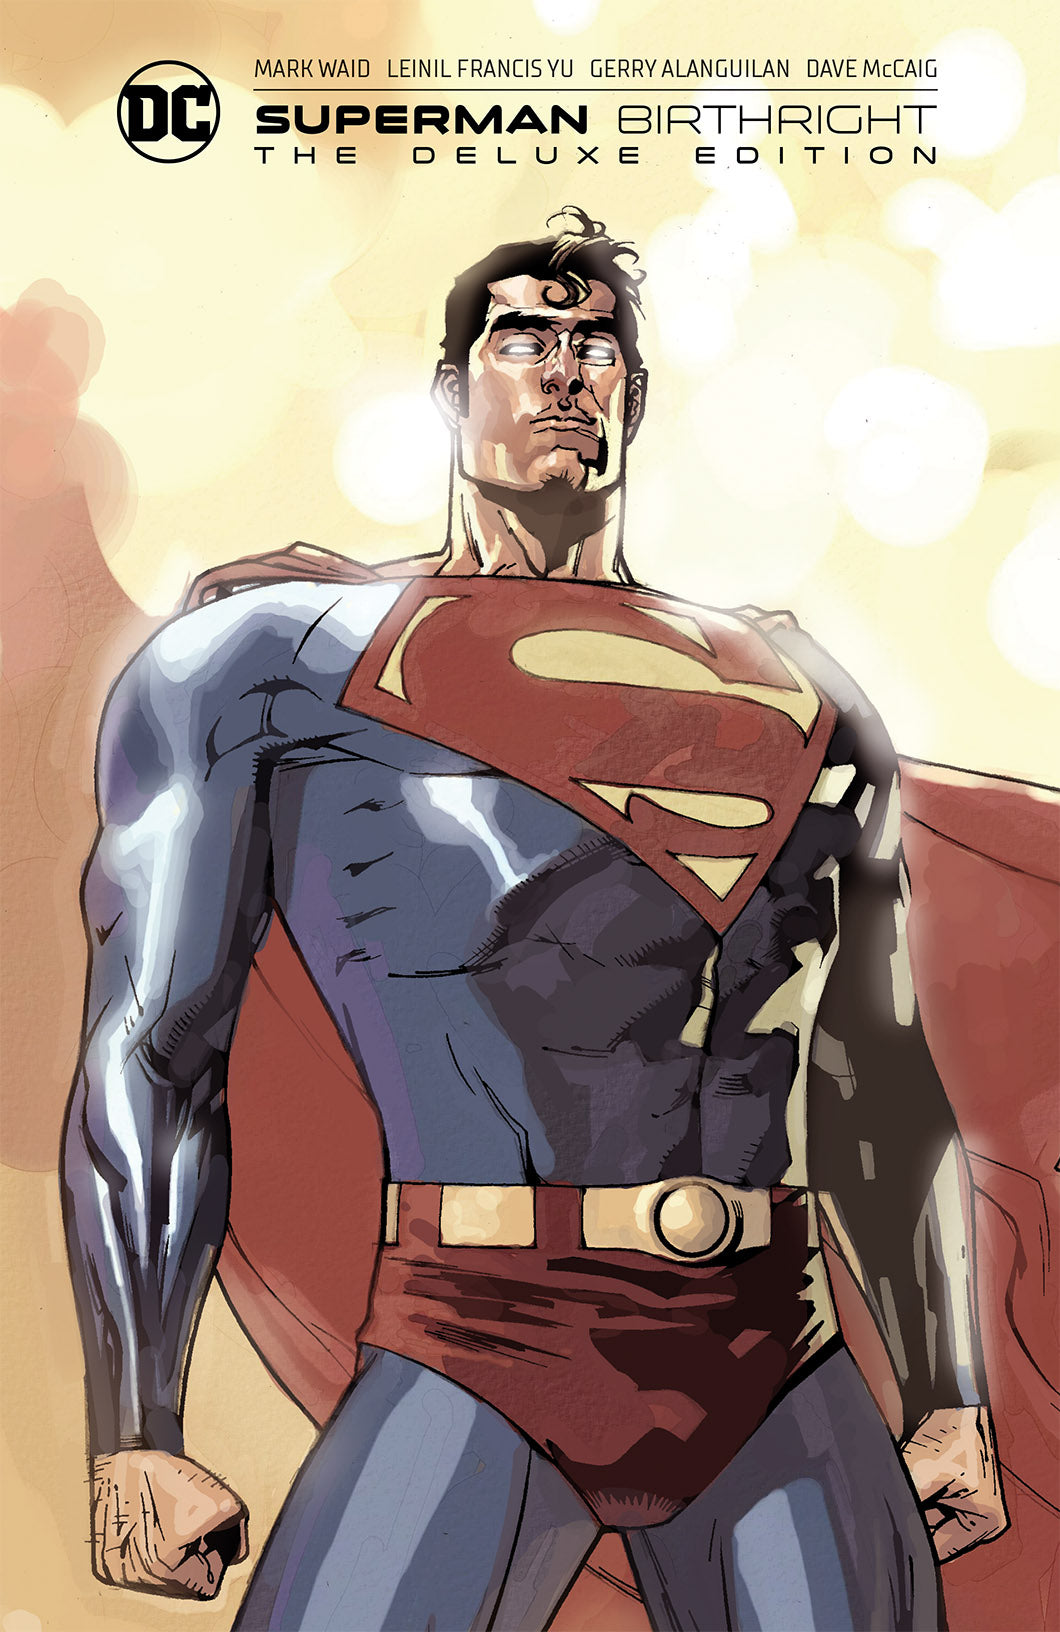 SUPERMAN BIRTHRIGHT THE DELUXE EDITION HARDCOVER